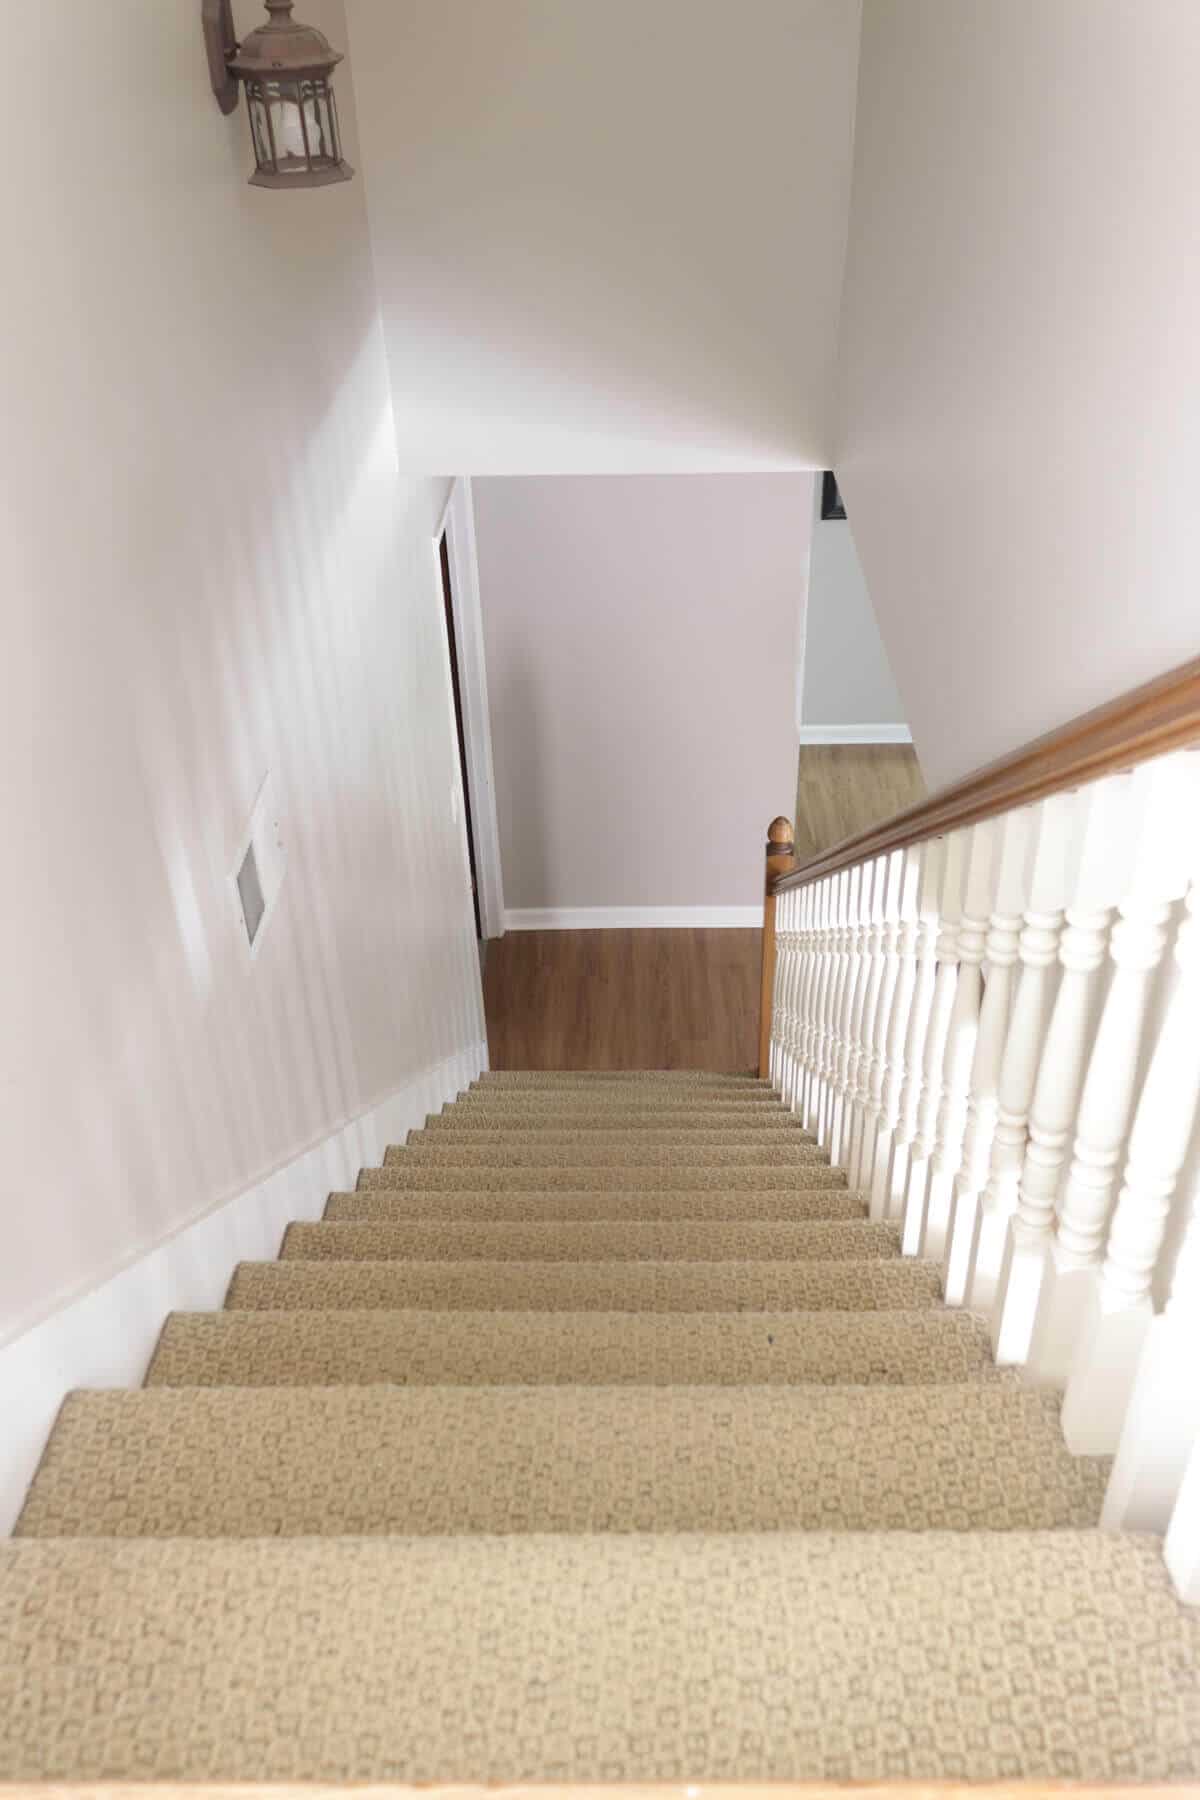 dated stairway with ugly tan carpet